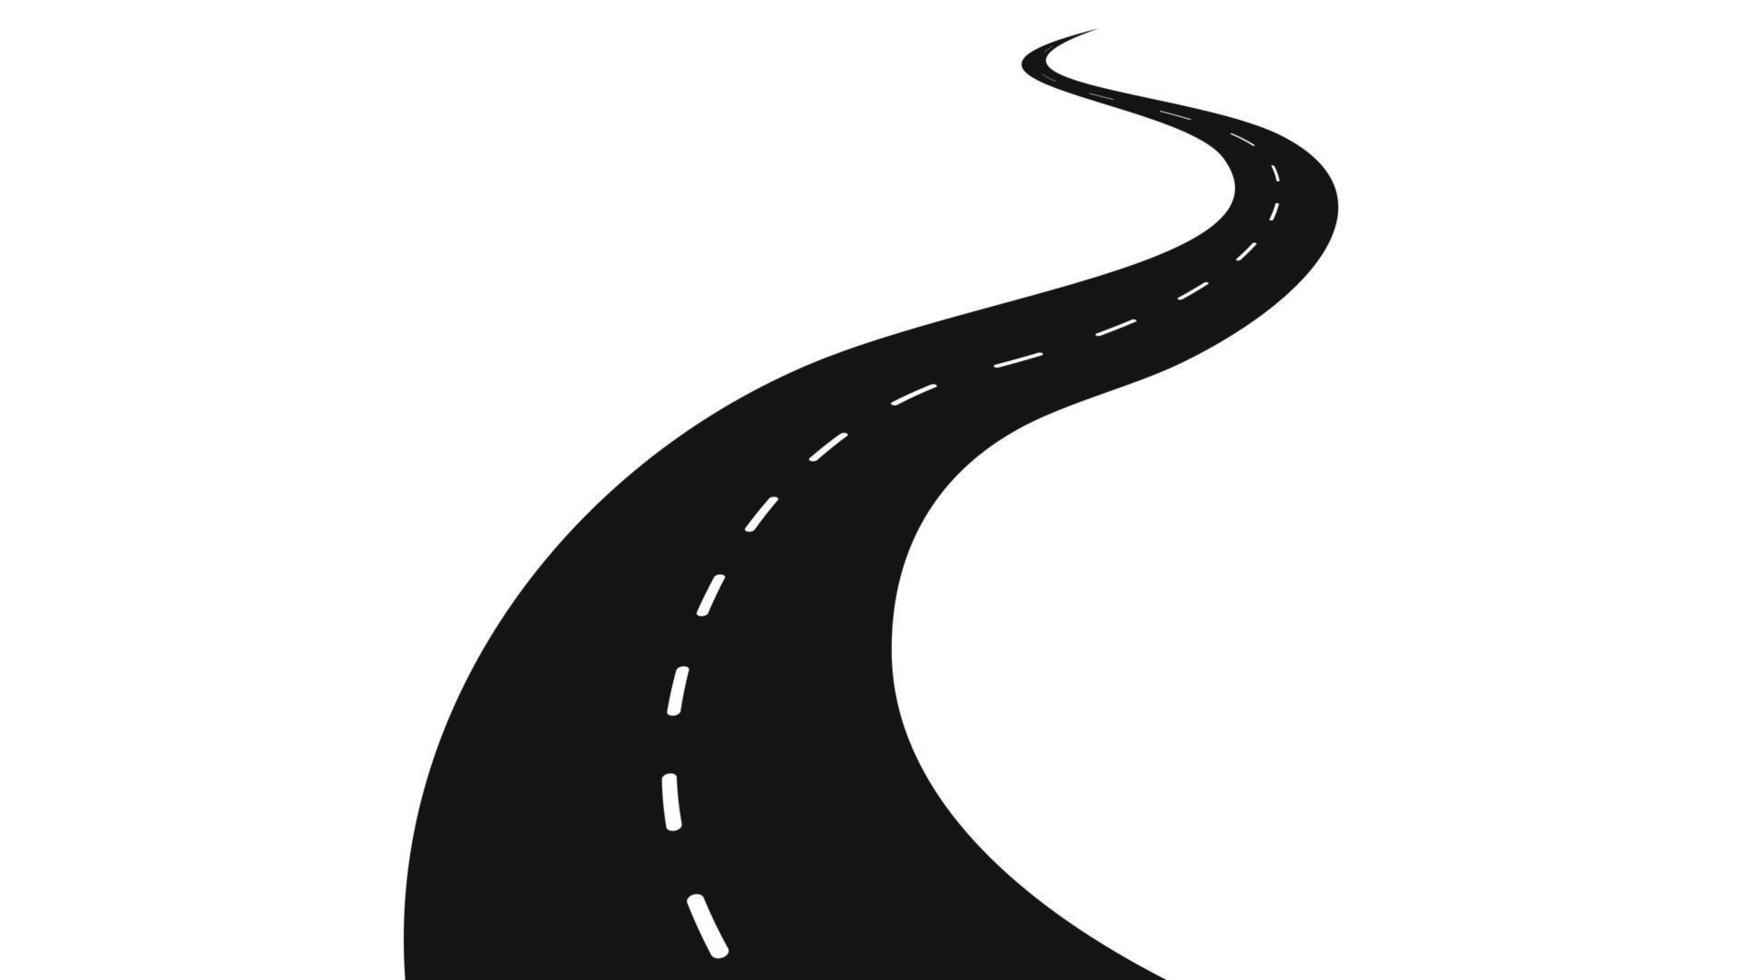 Winding highway road. Black coil line asphalt with white dotted line difficulties of life path with constantly changing events vector priorities